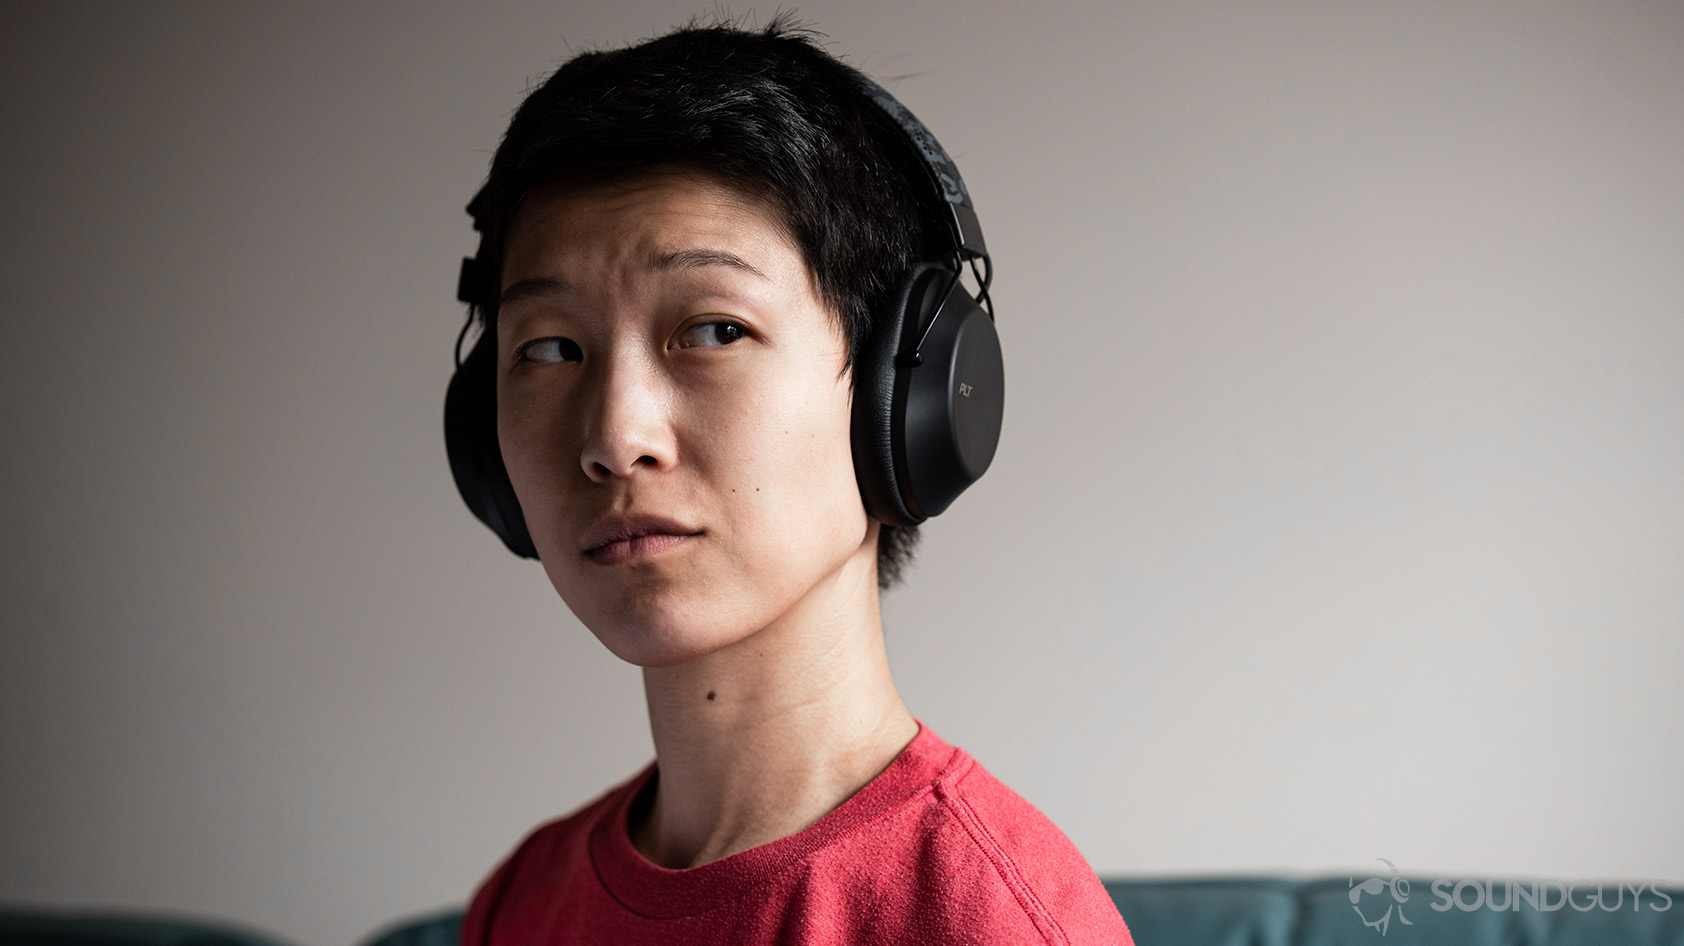 A picture of the cheap wireless headphones, Plantronics BackBeat Fit 6100, worn by a woman against an off-white wall.